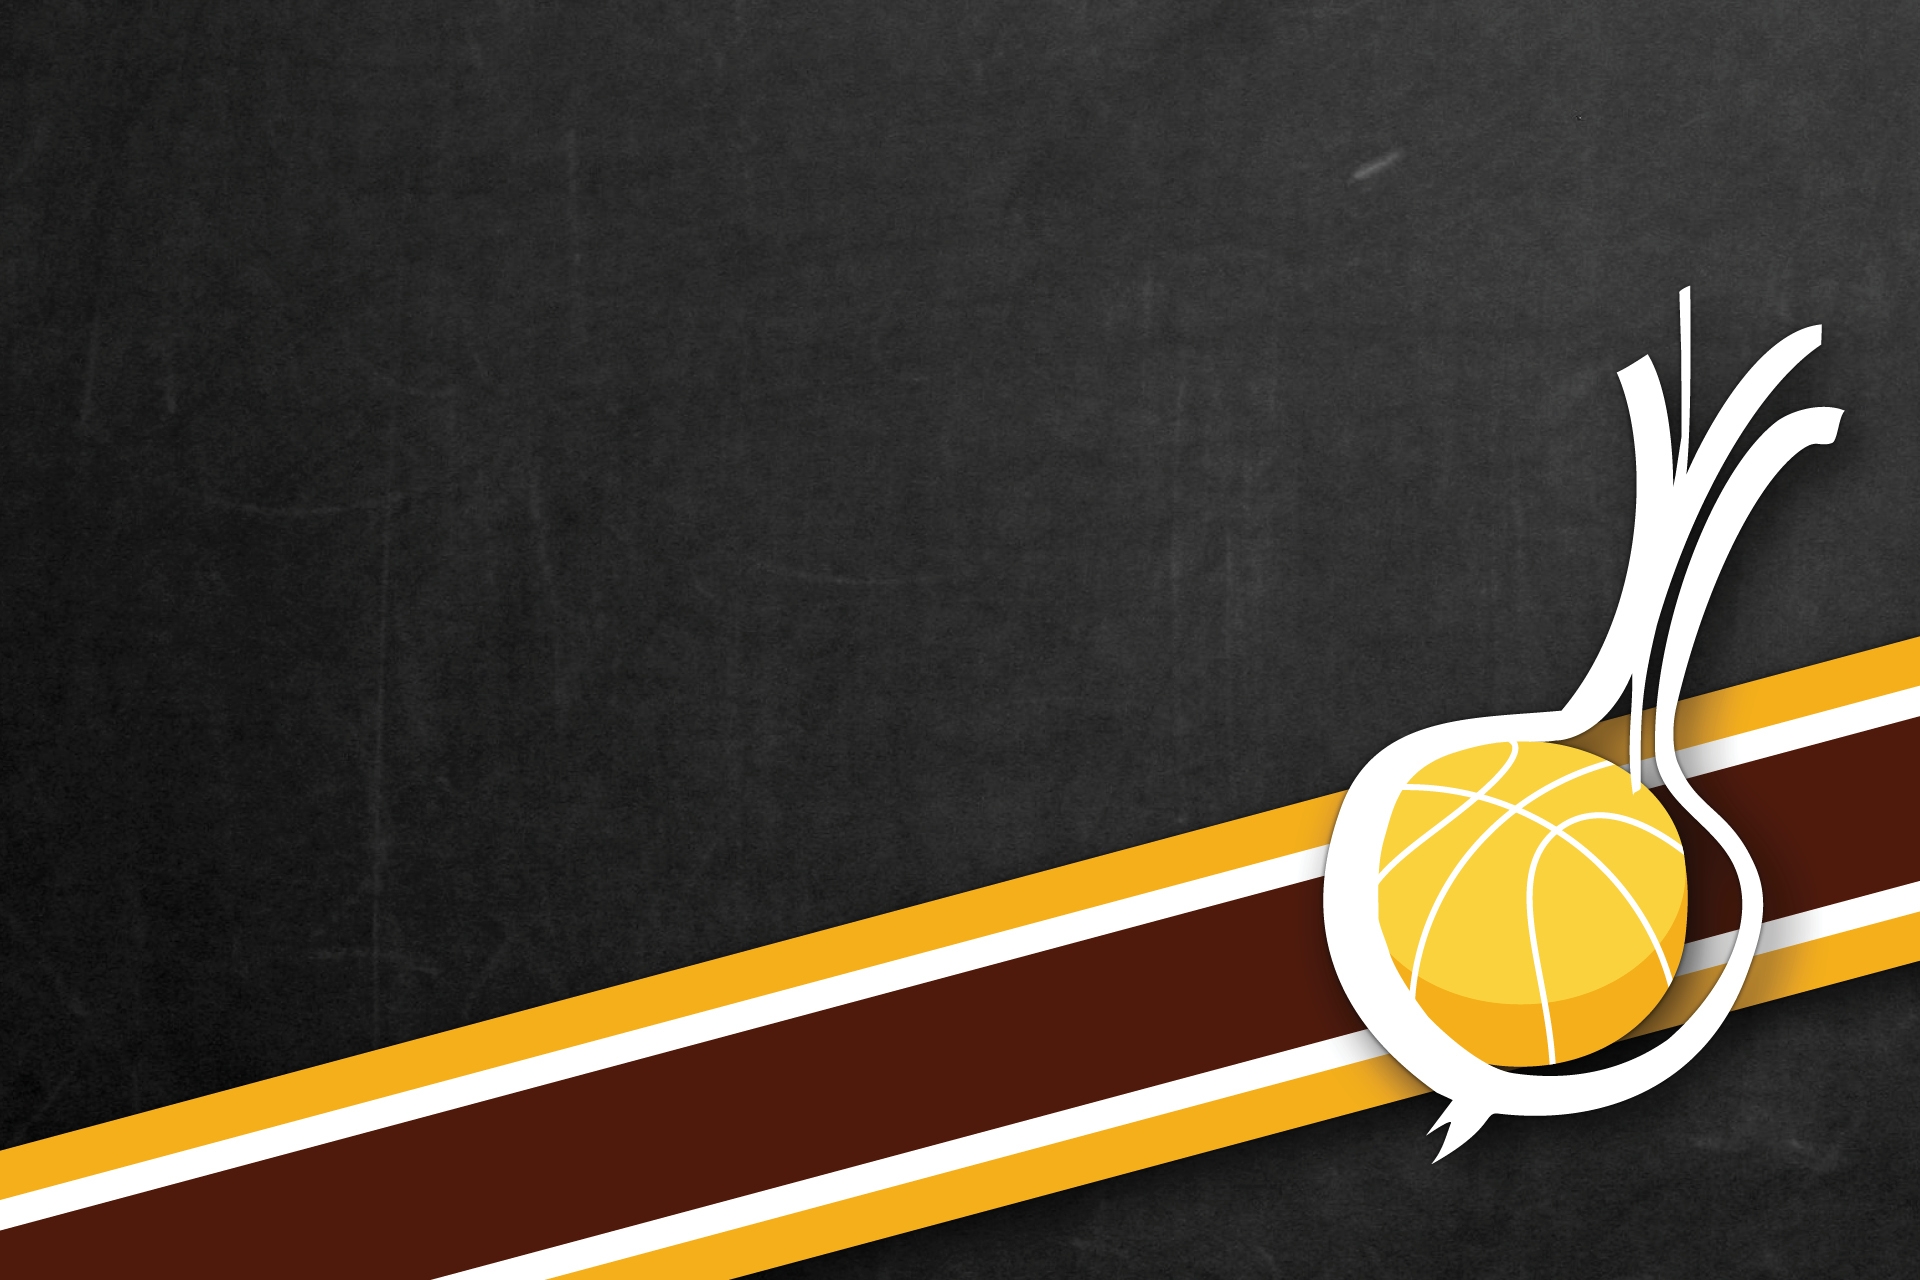 A diagonal row of gold, white and brick red stripes cuts across a chalkboard from the bottom left to the center right. On top of the stripes at the right side, there is a white outline of an onion with a yellow basketball in the center of it.